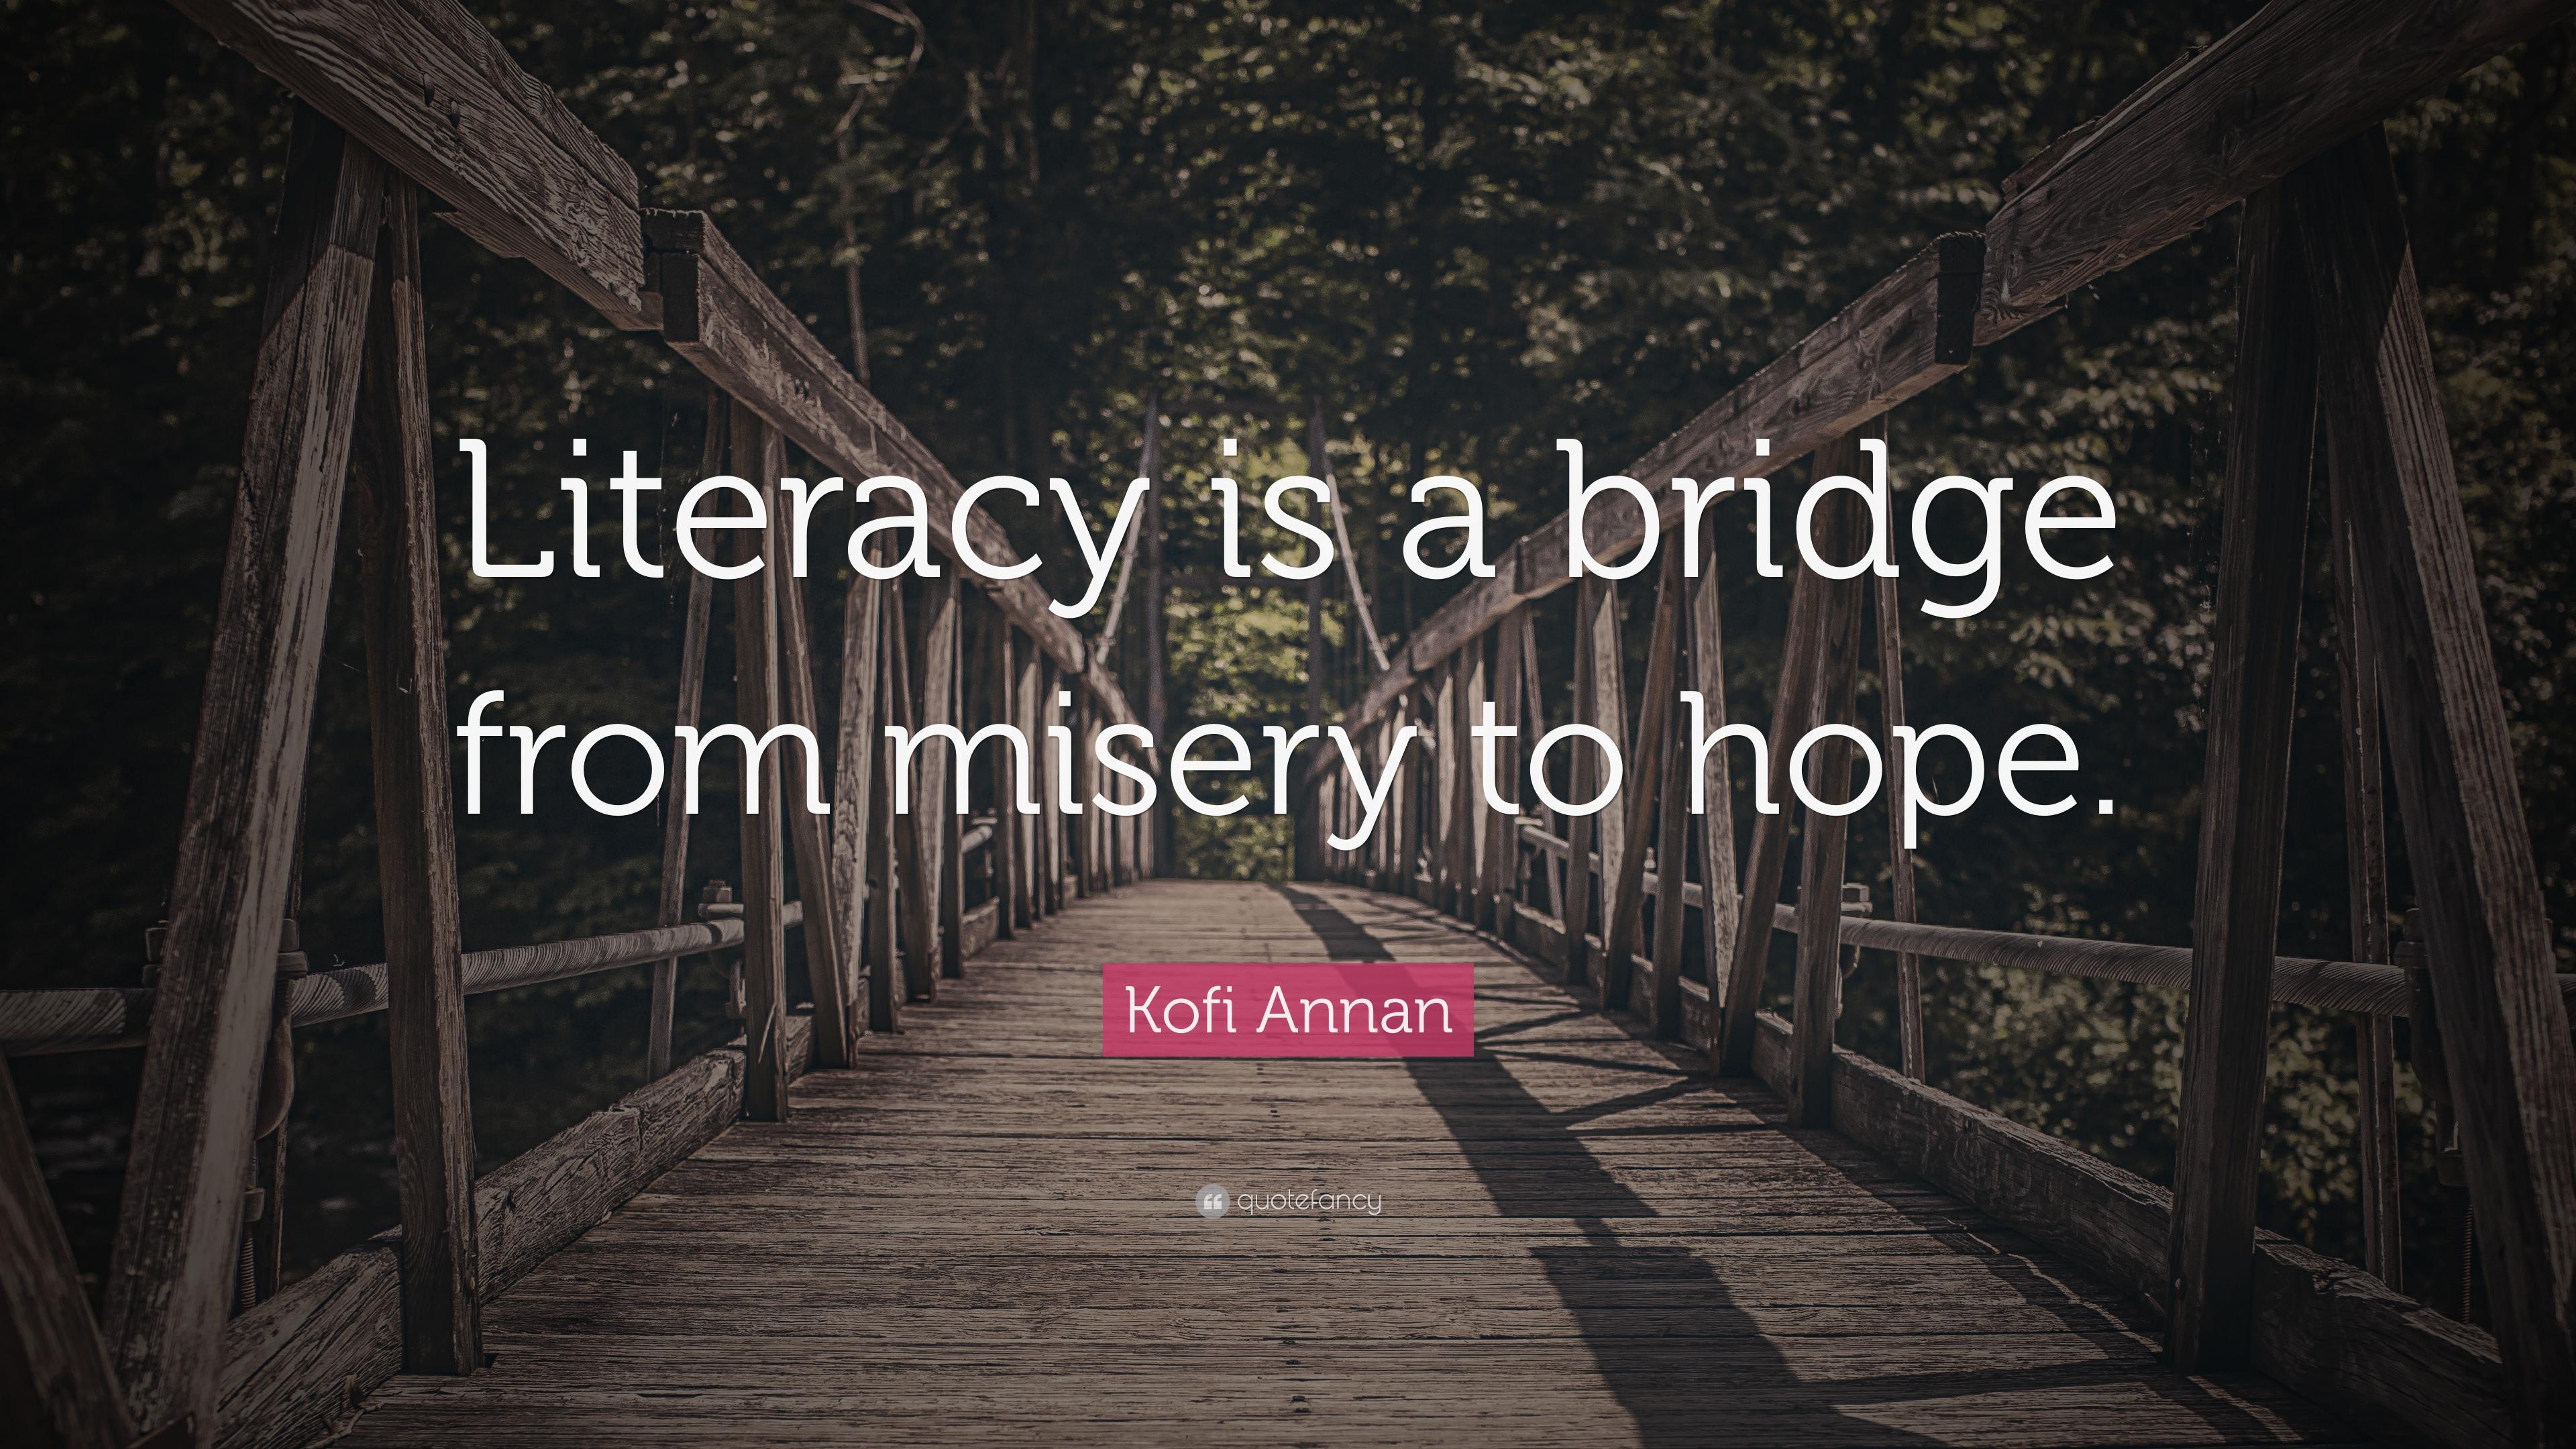 Kofi Annan Quote: “Literacy is a bridge from misery to hope.” 9